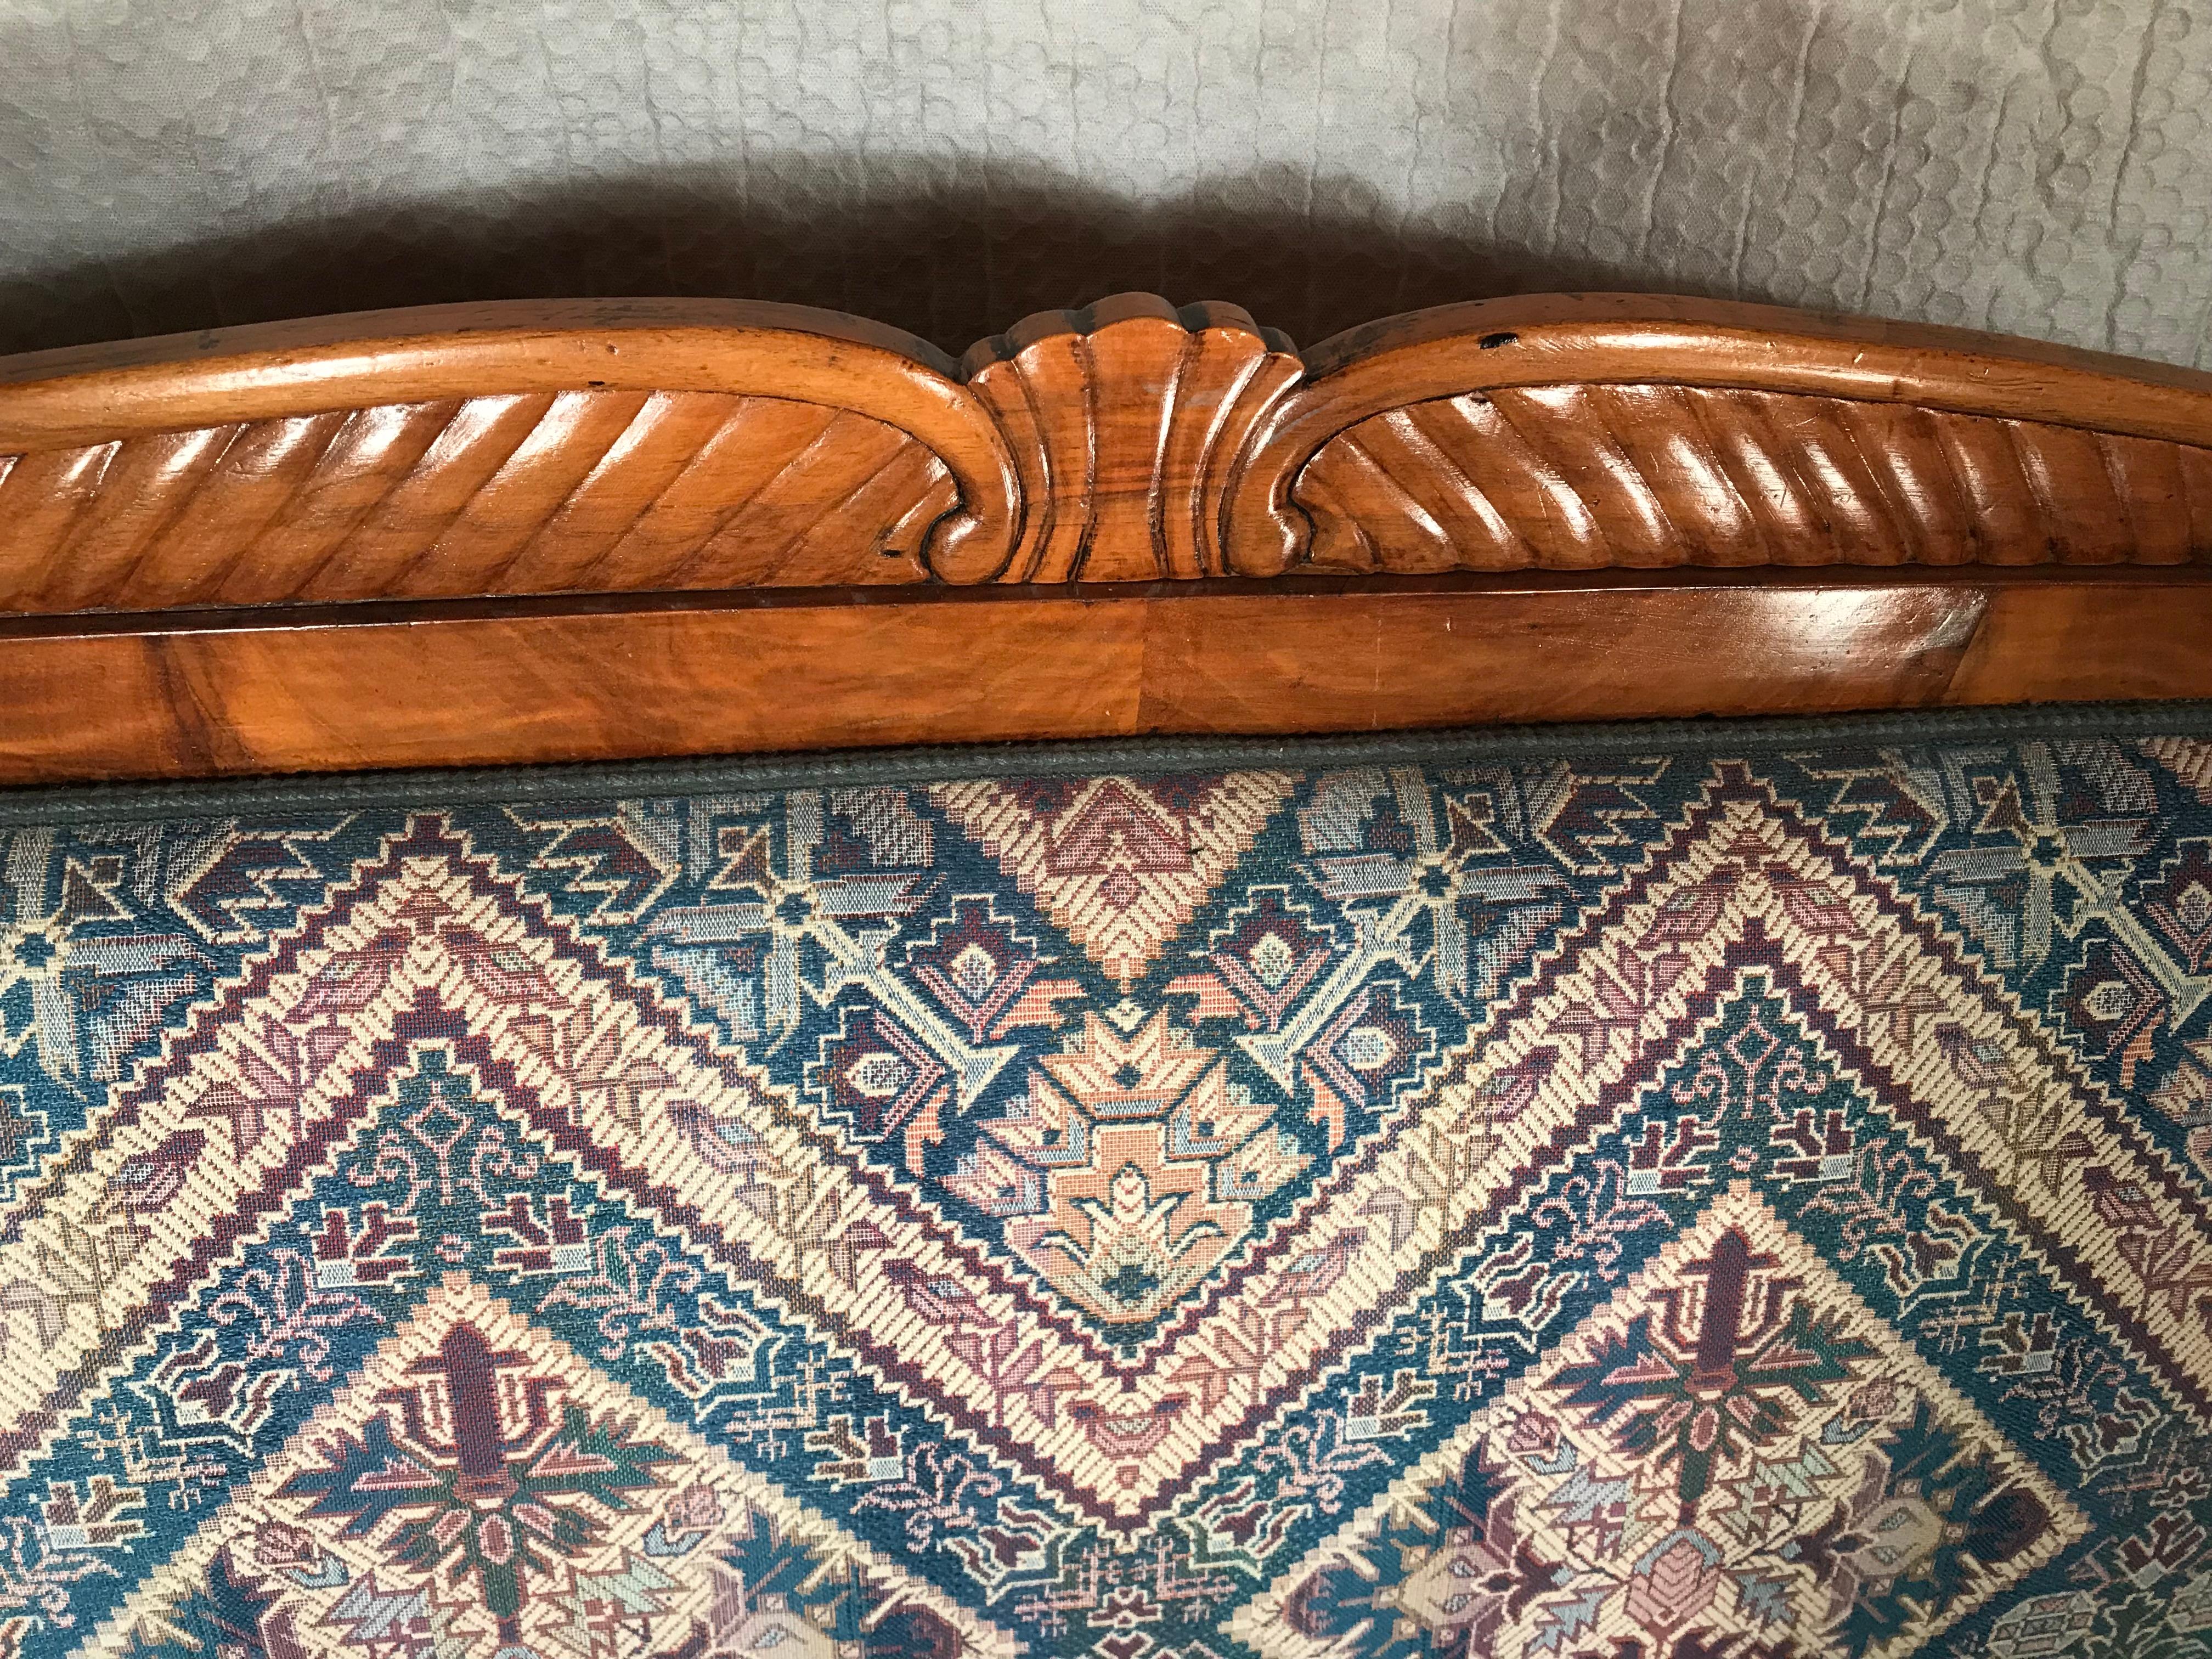 Beautiful small Biedermeier settee, Vienna 1820, walnut veneer. In very good condition. The settee will be shipped from Germany. Shipping costs to Boston are included.